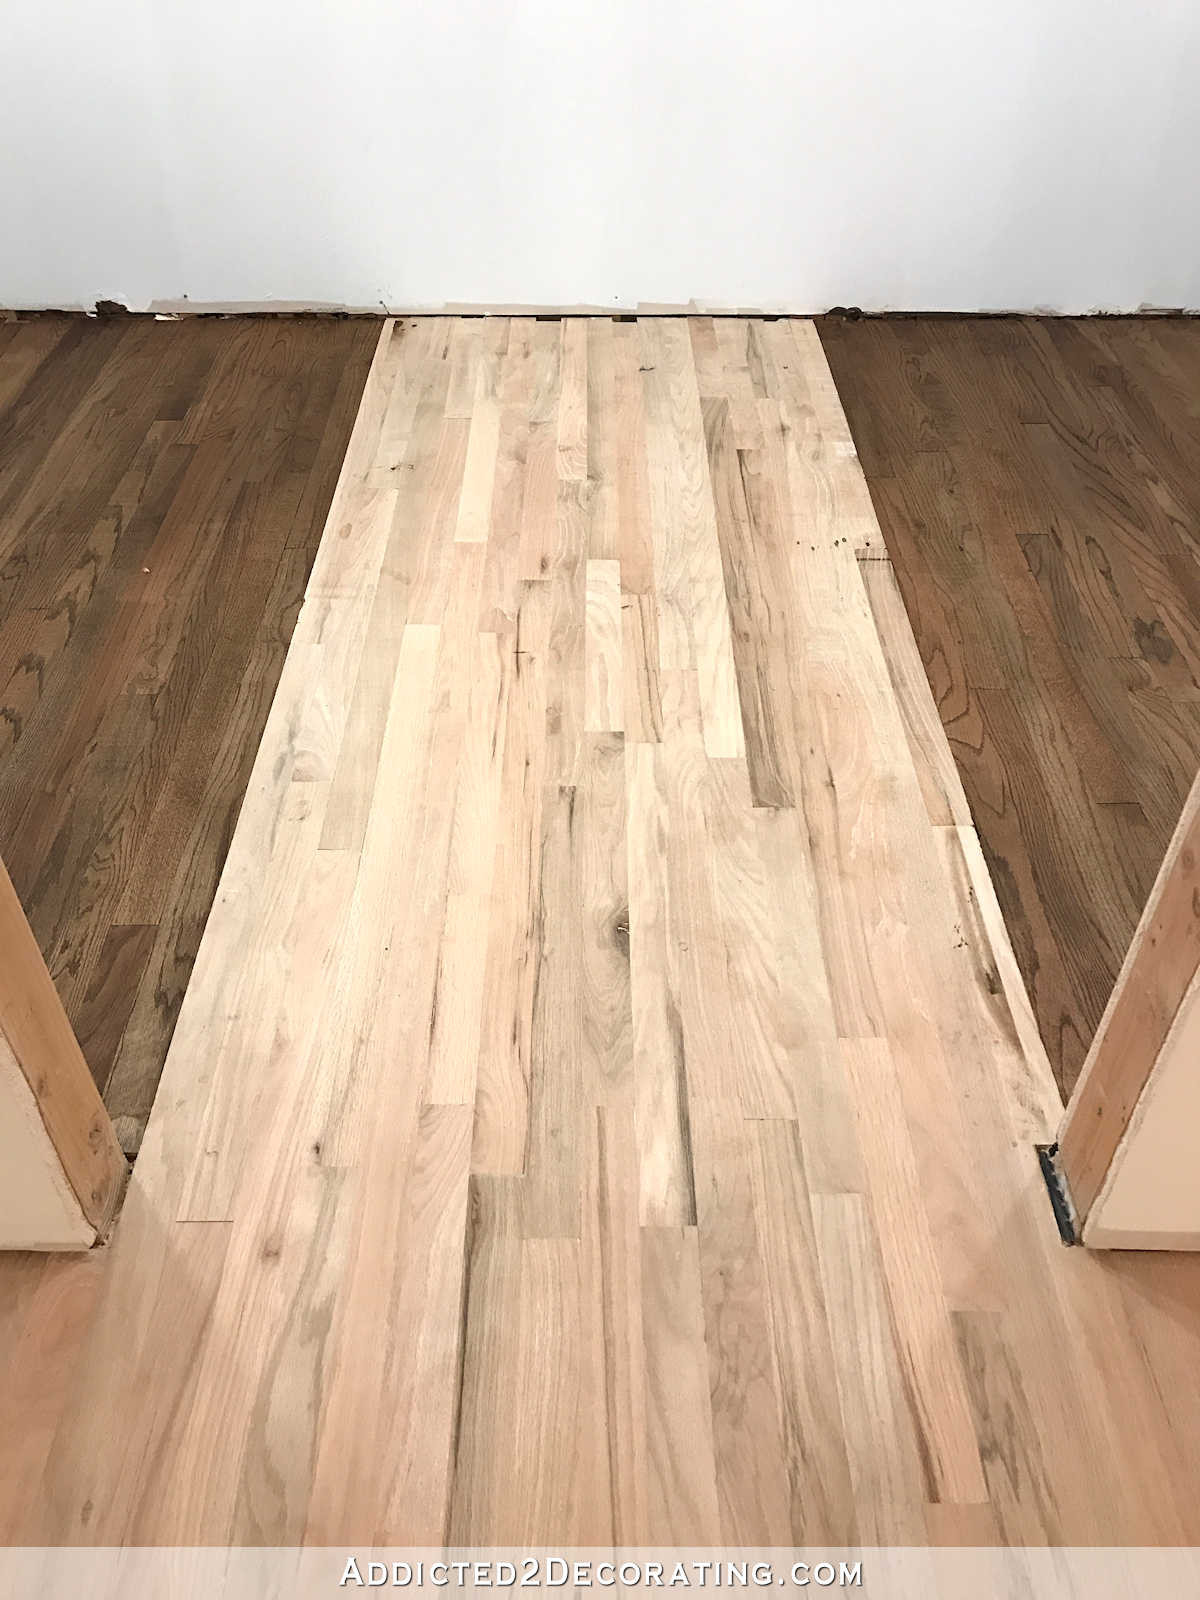 best hardwood floor sealer of adventures in staining my red oak hardwood floors products process with staining red oak hardwood floors 11 stain on left and right sides of the